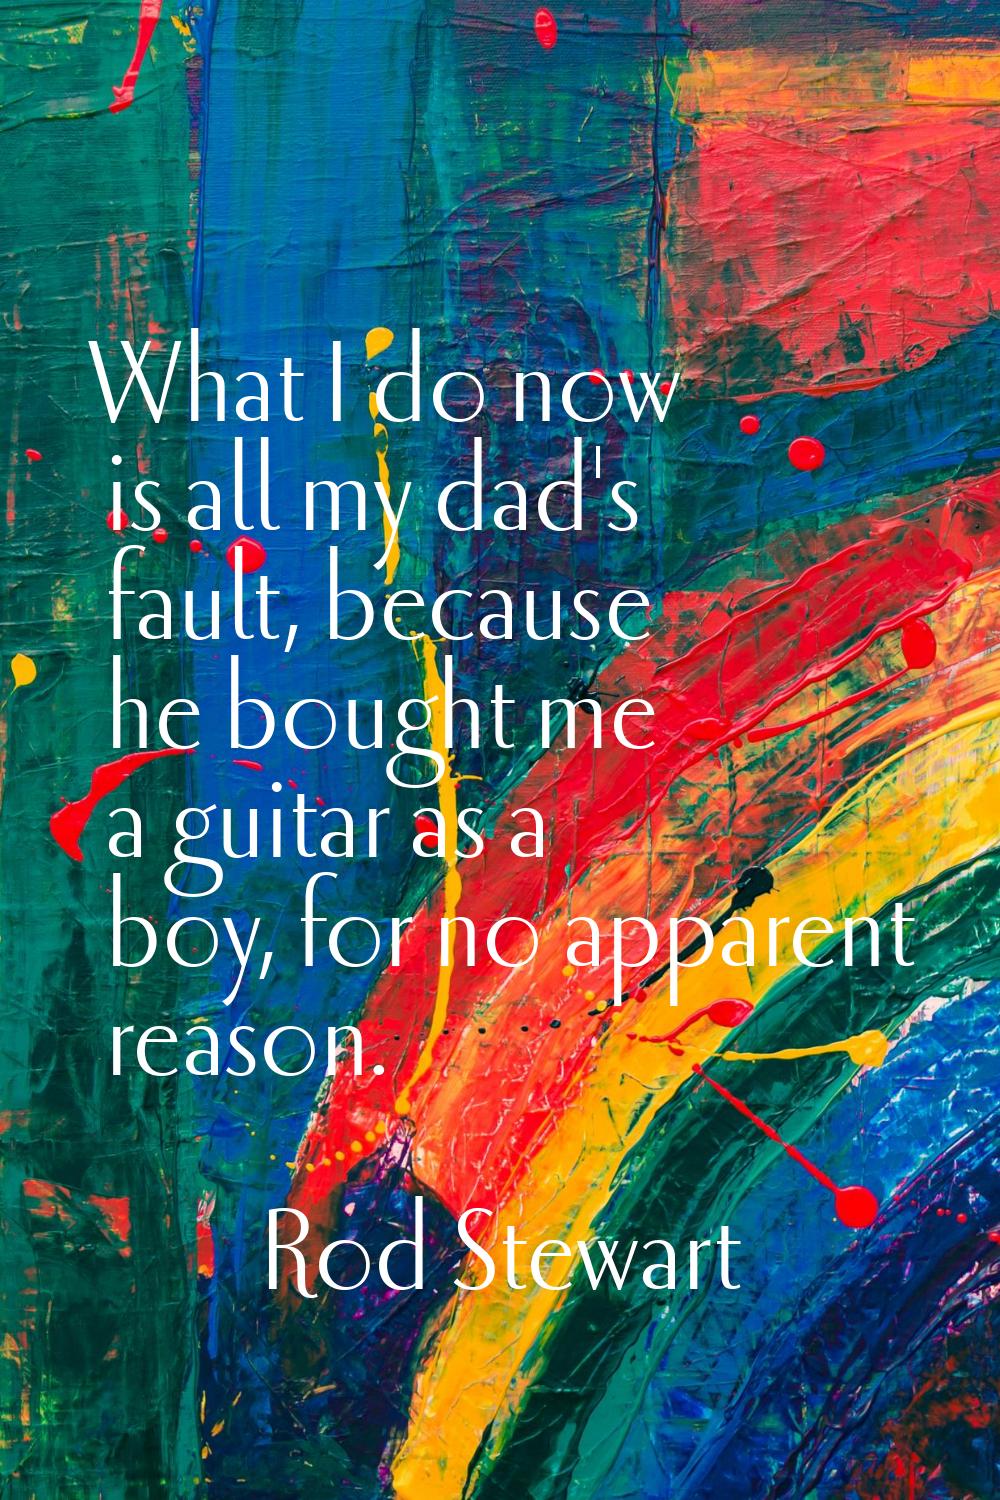 What I do now is all my dad's fault, because he bought me a guitar as a boy, for no apparent reason